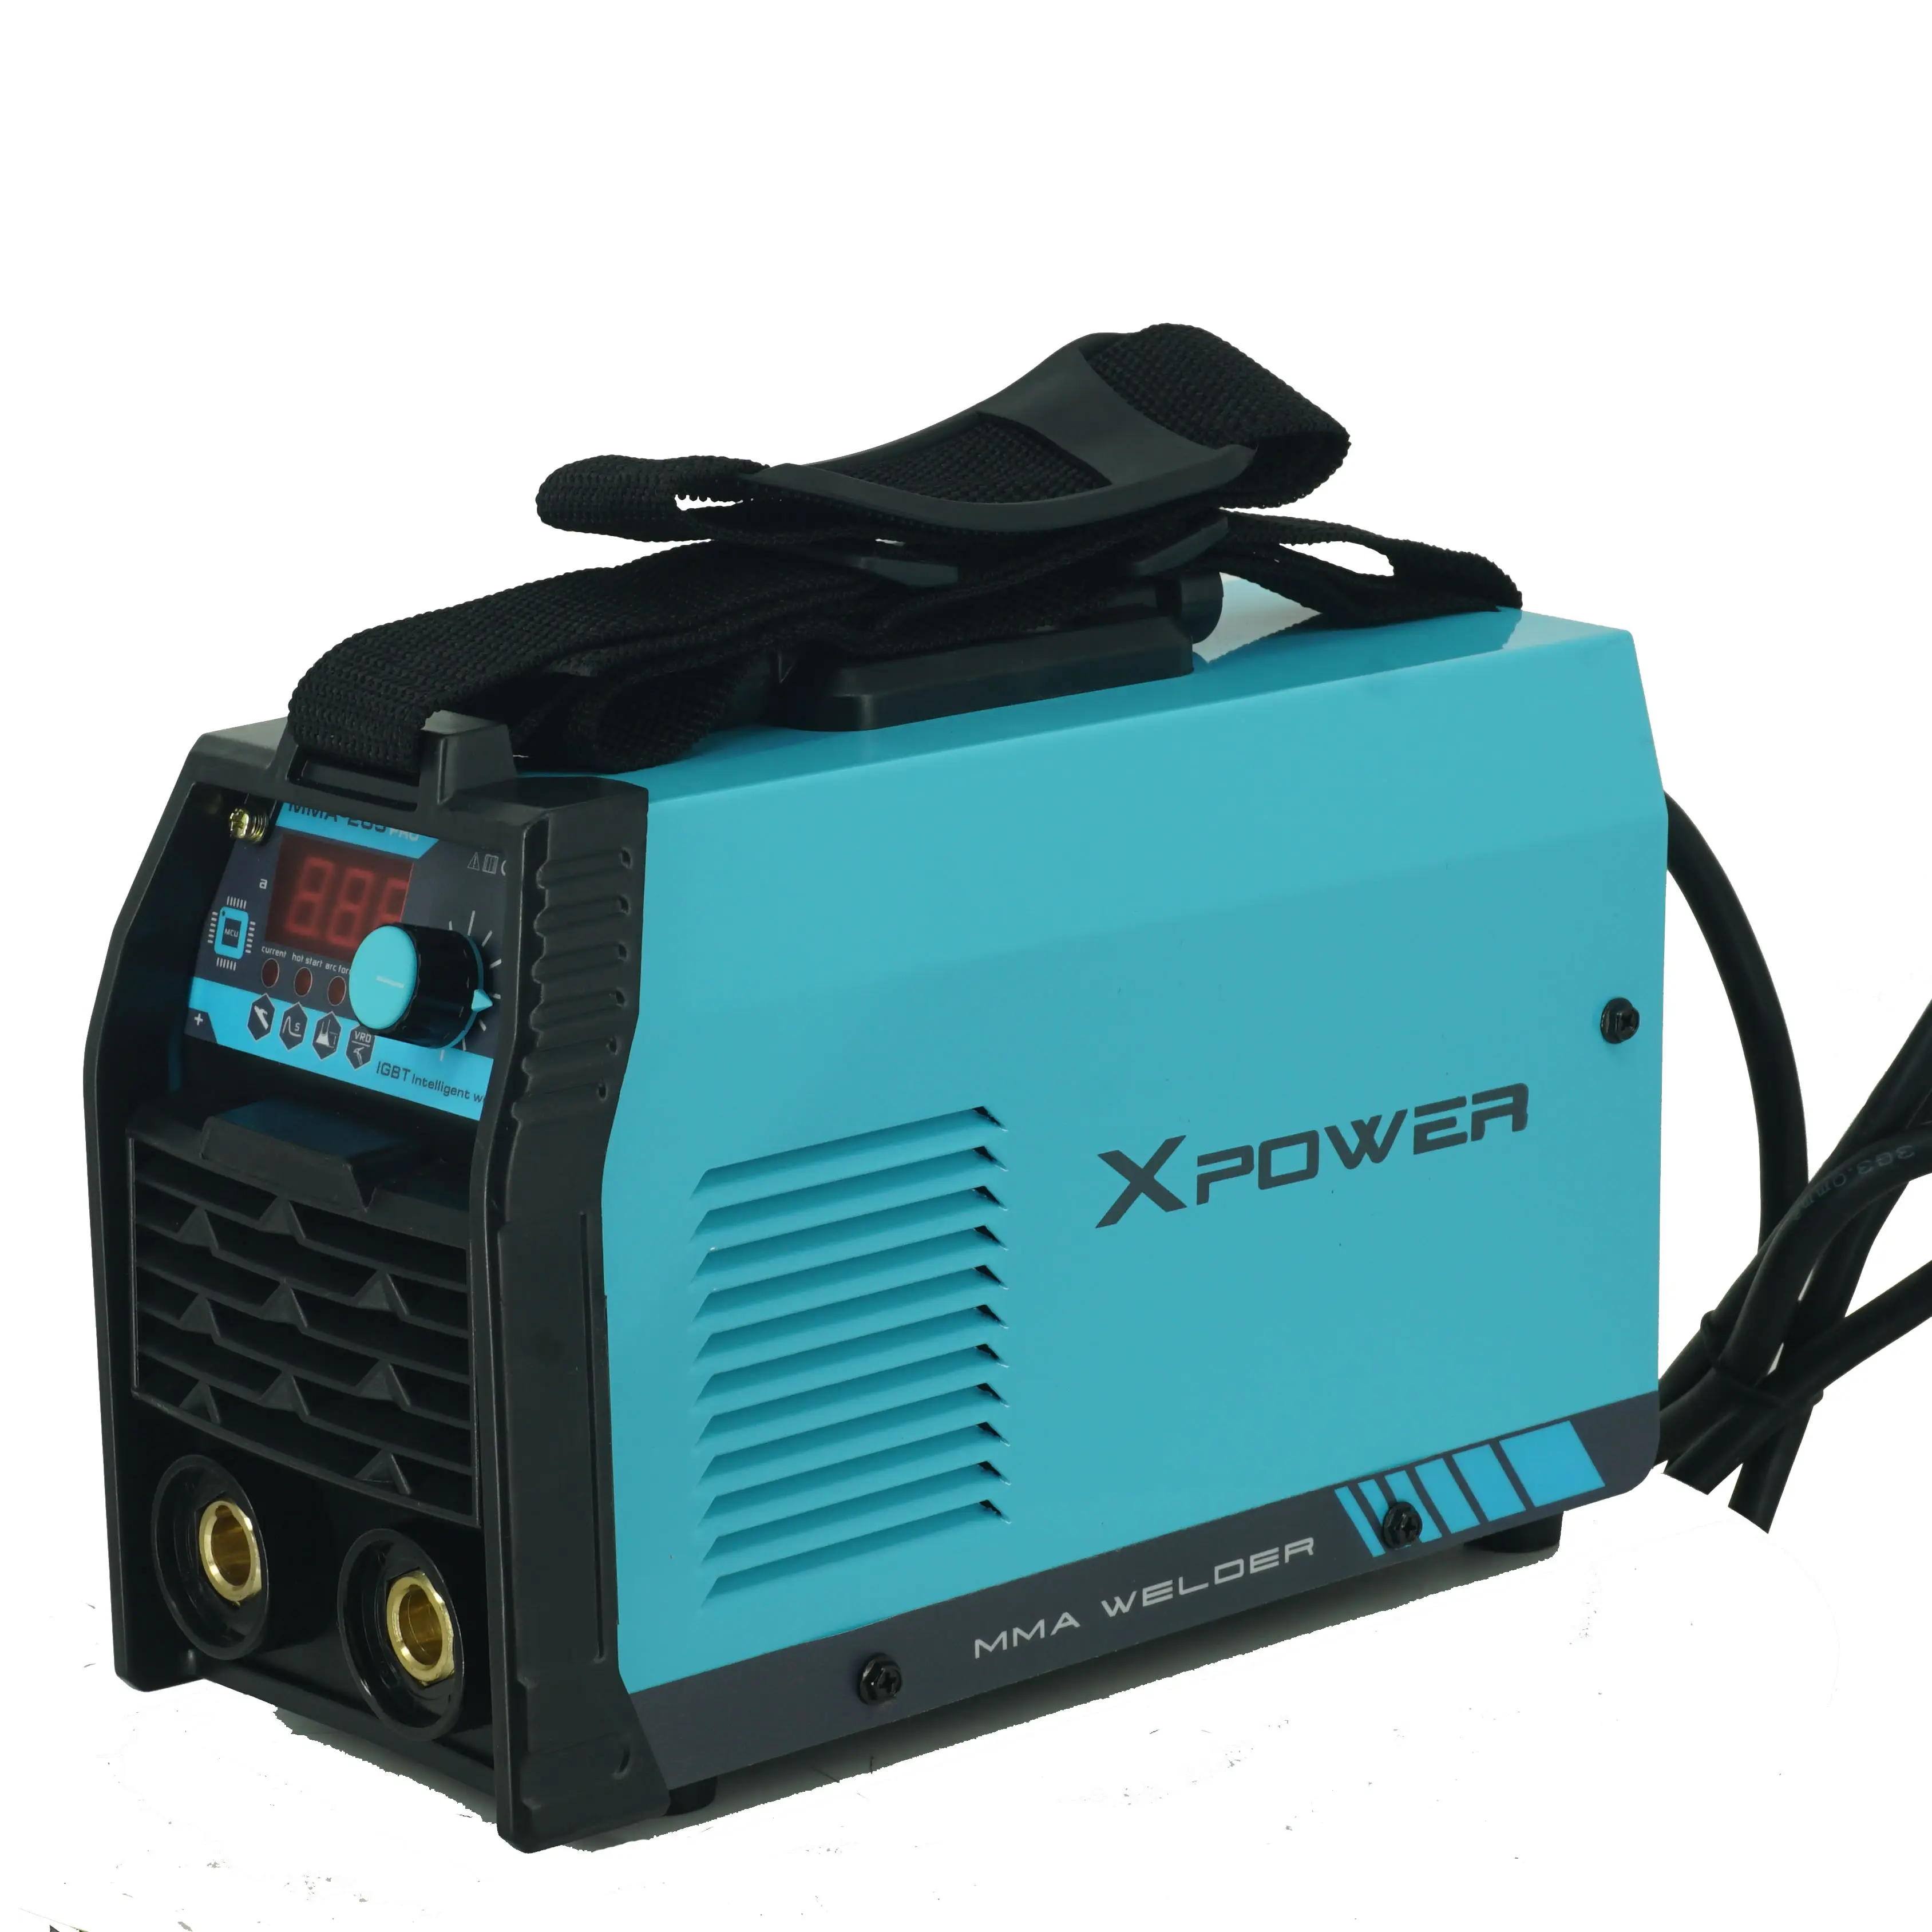 Safe other arc welders 200A mma igbt invert other welding equipment on sale with good attention